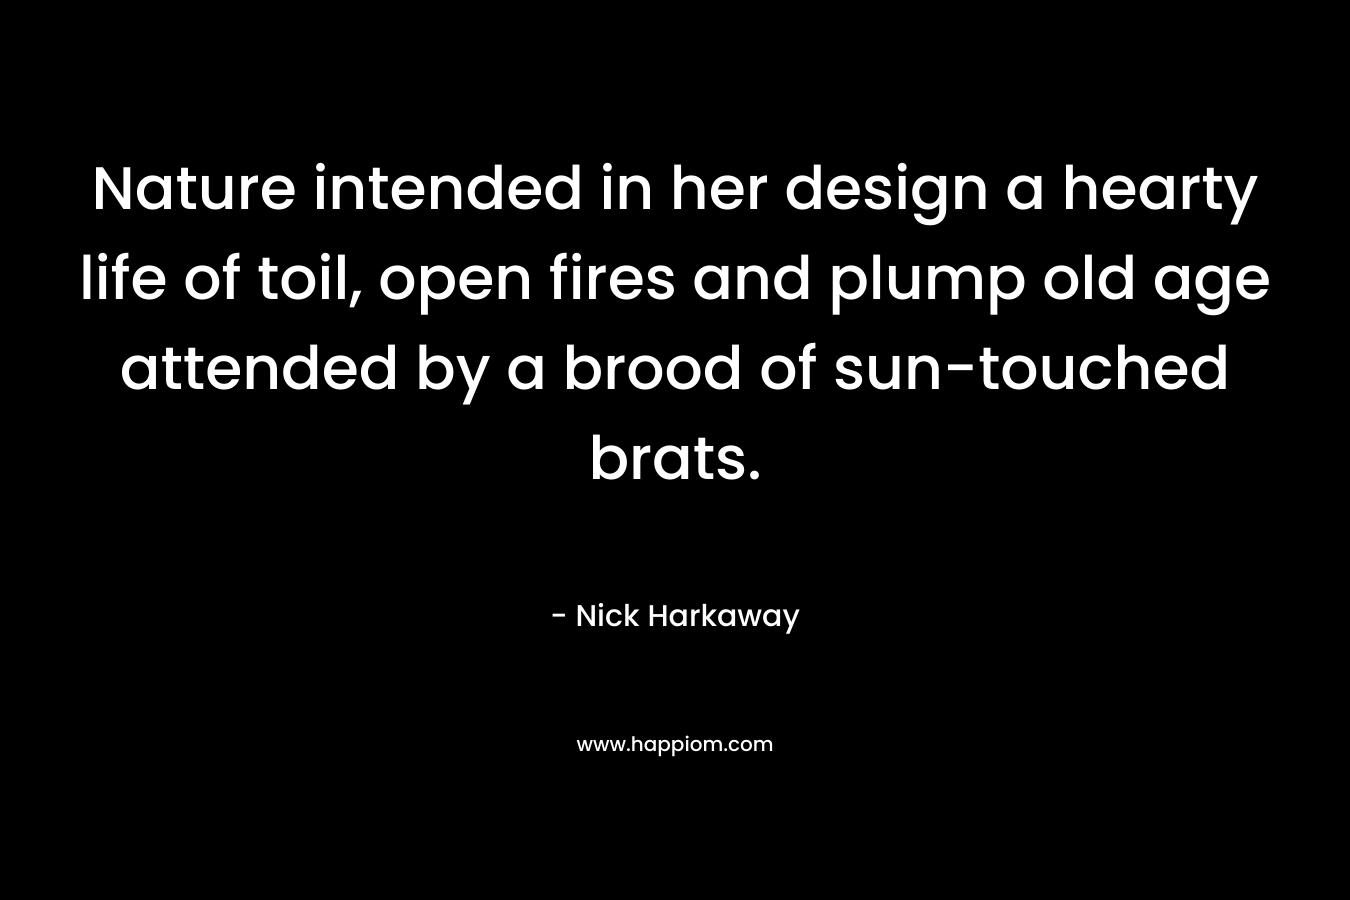 Nature intended in her design a hearty life of toil, open fires and plump old age attended by a brood of sun-touched brats. – Nick Harkaway